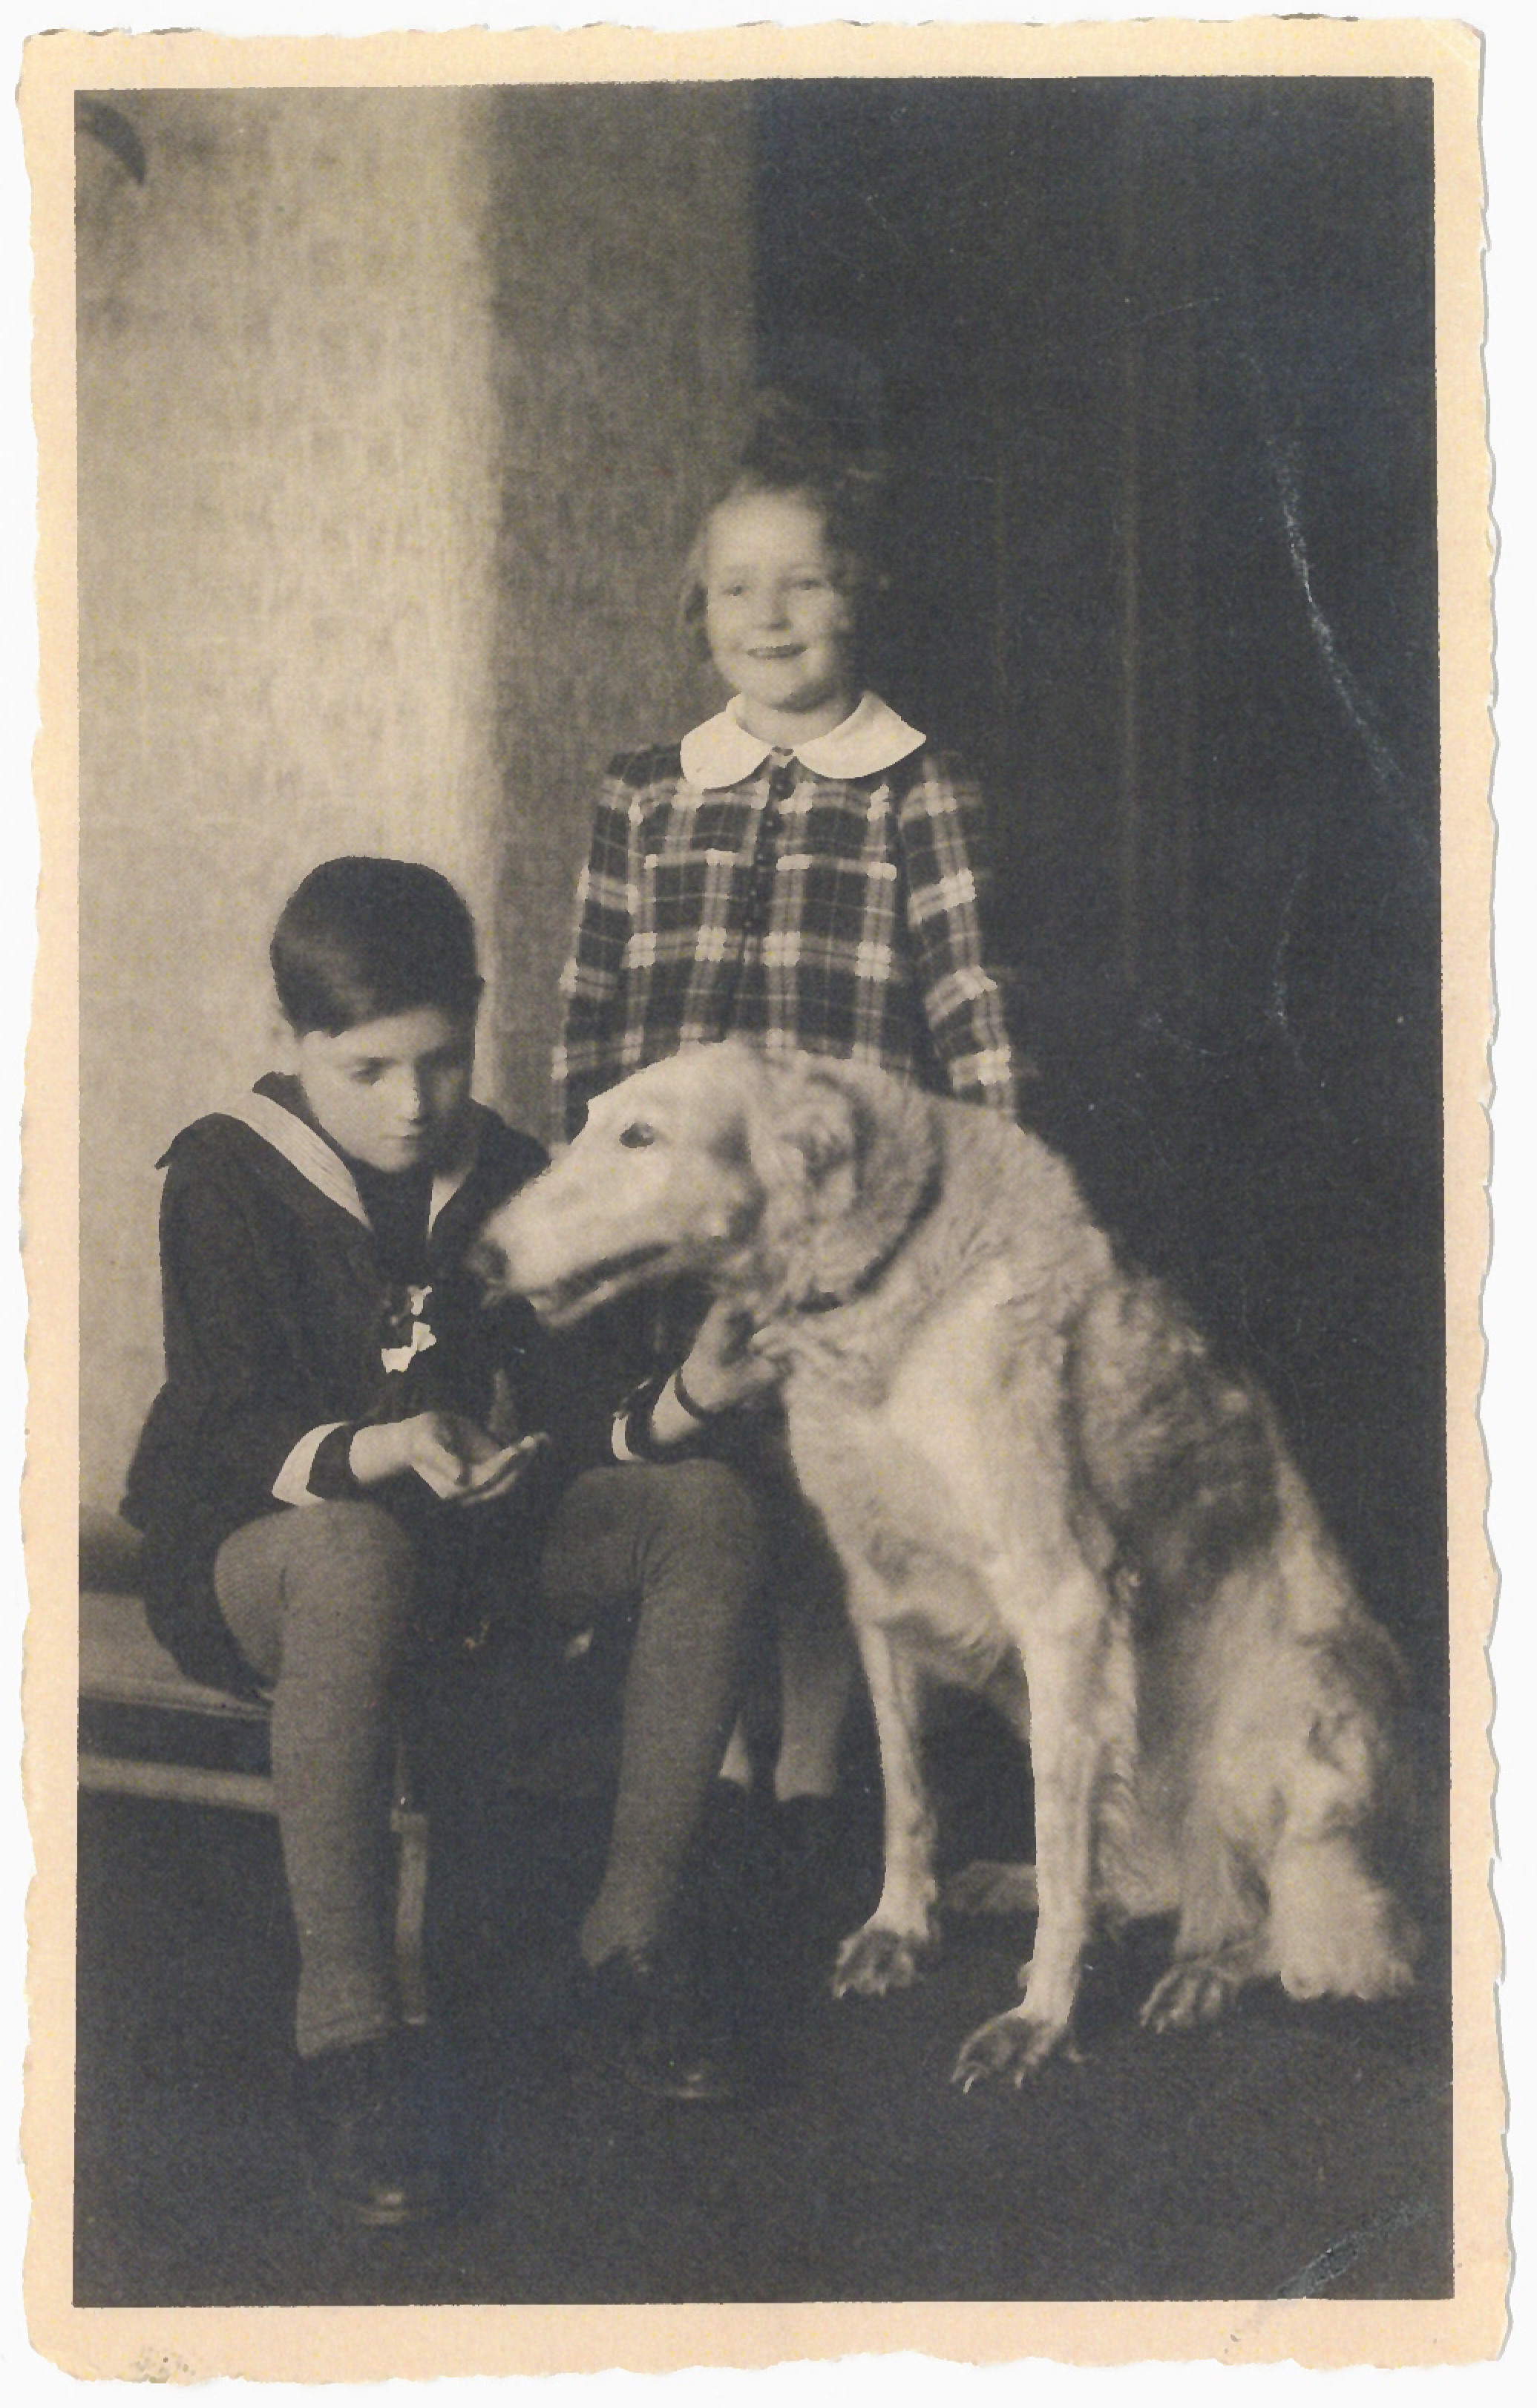 Another archival photo of Hana and George Brady. Courtesy Biller Family Foundation